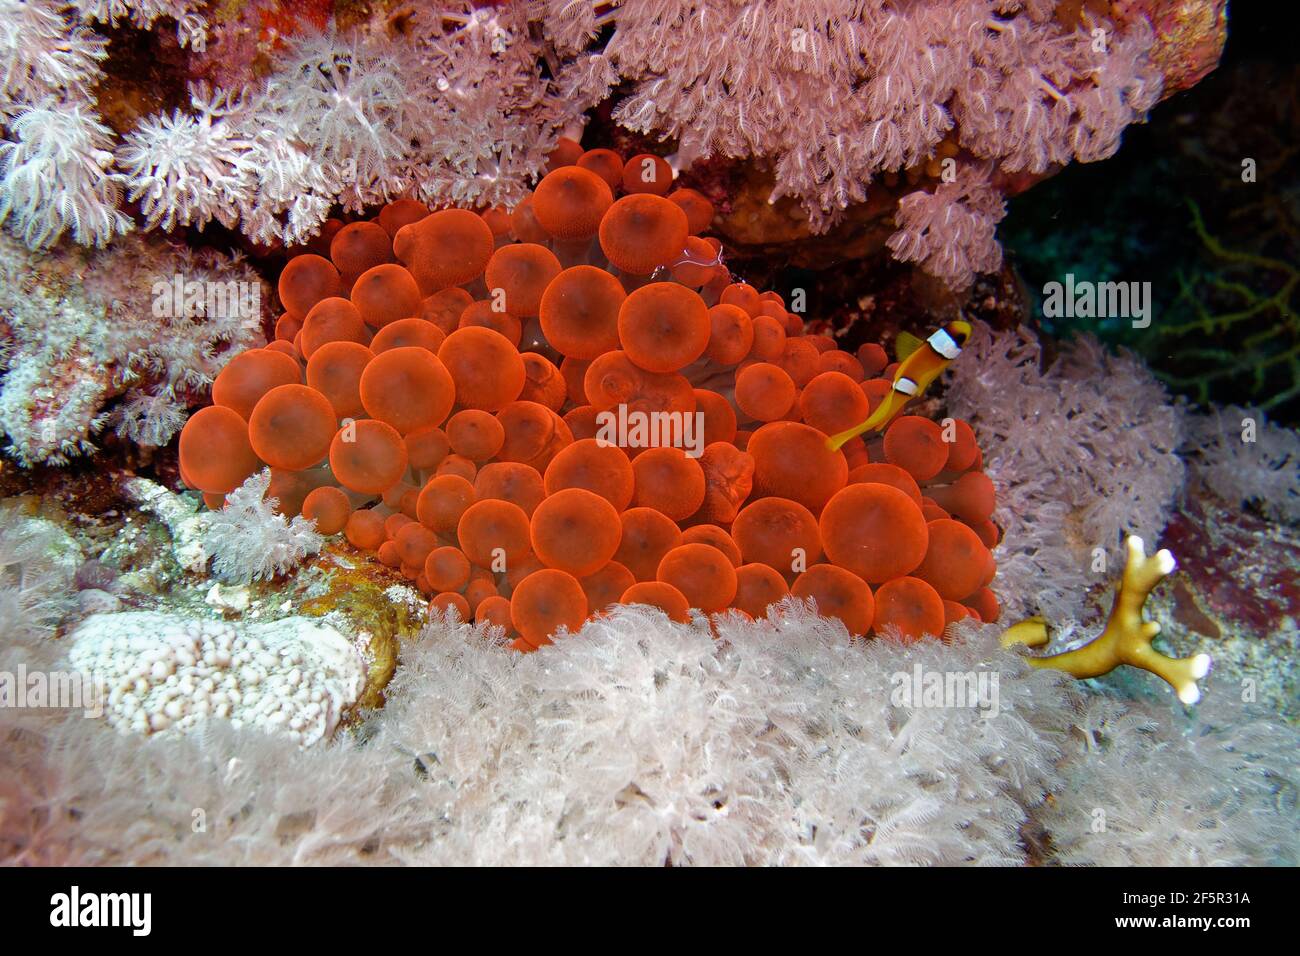 Bulb-tentacle sea anemone (Entacmaea quadricolor) and Clownfish in Red Sea Stock Photo